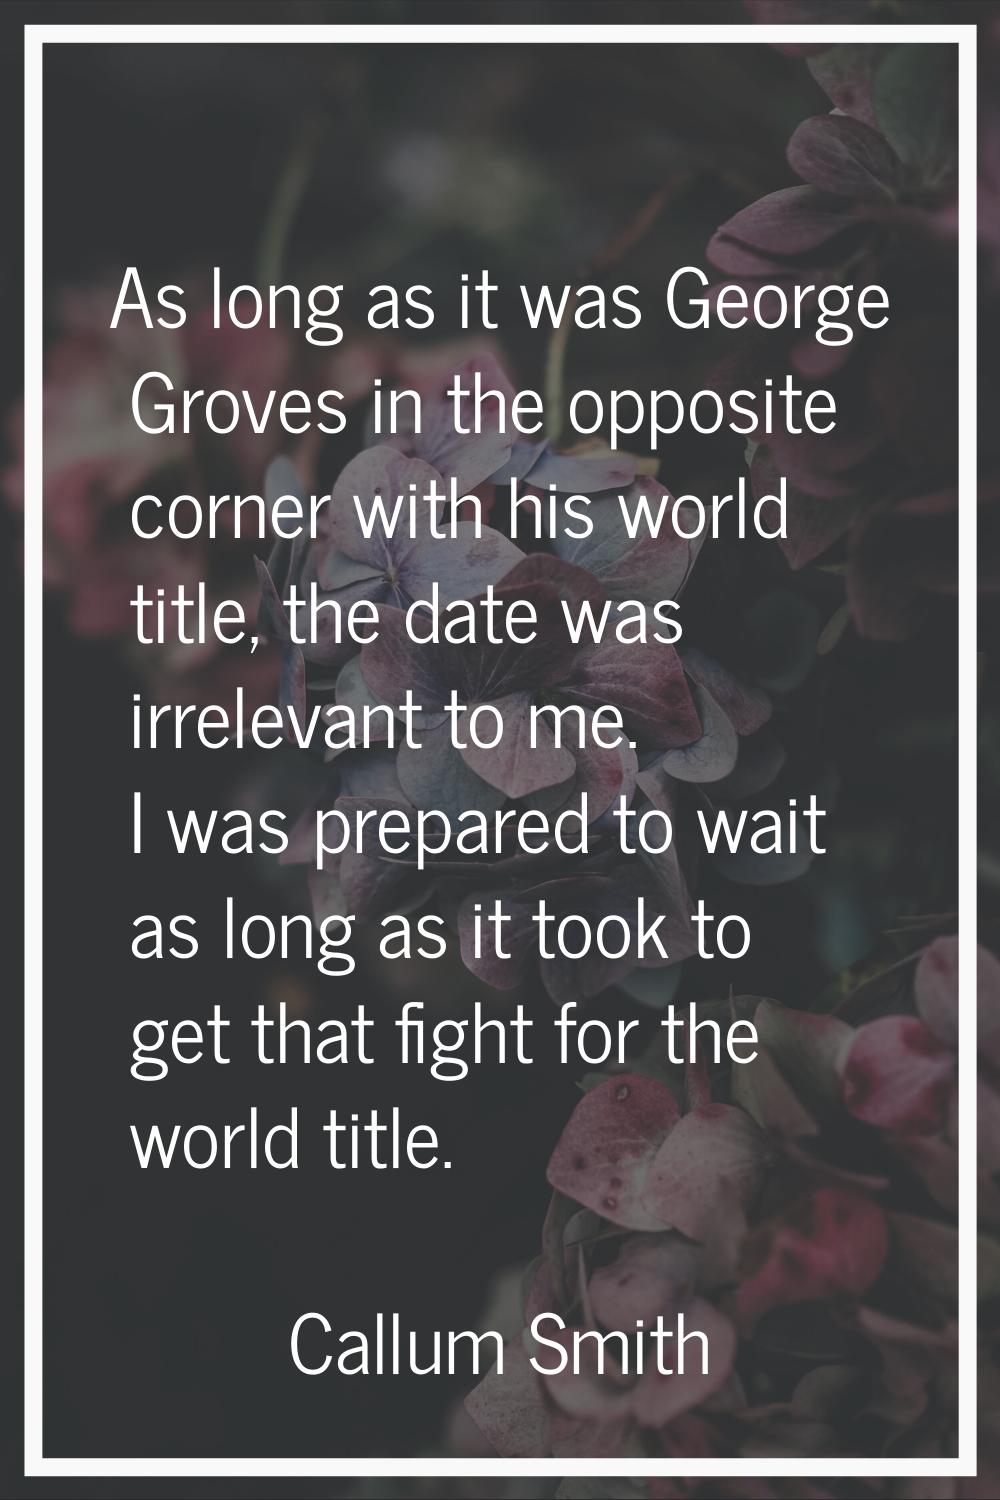 As long as it was George Groves in the opposite corner with his world title, the date was irrelevan